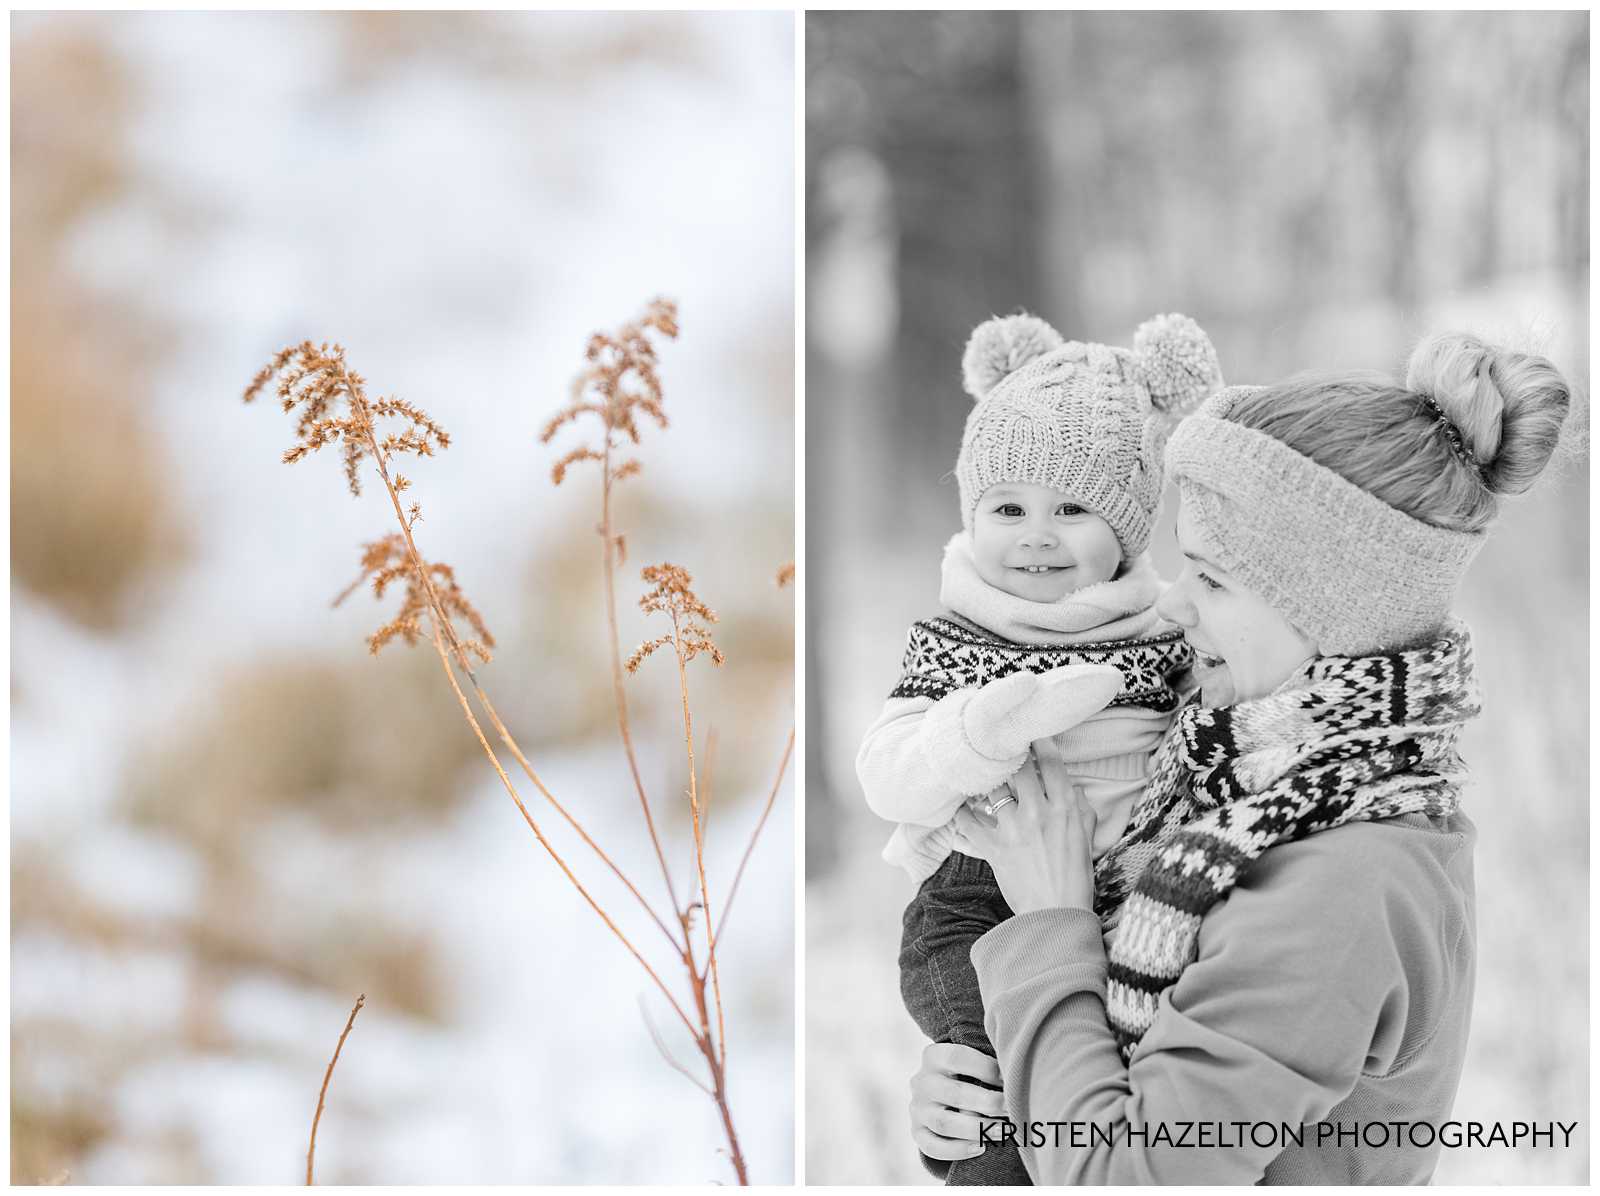 Black and white photo of mom holding her toddler daughter. Both are wearing winter snow gear.